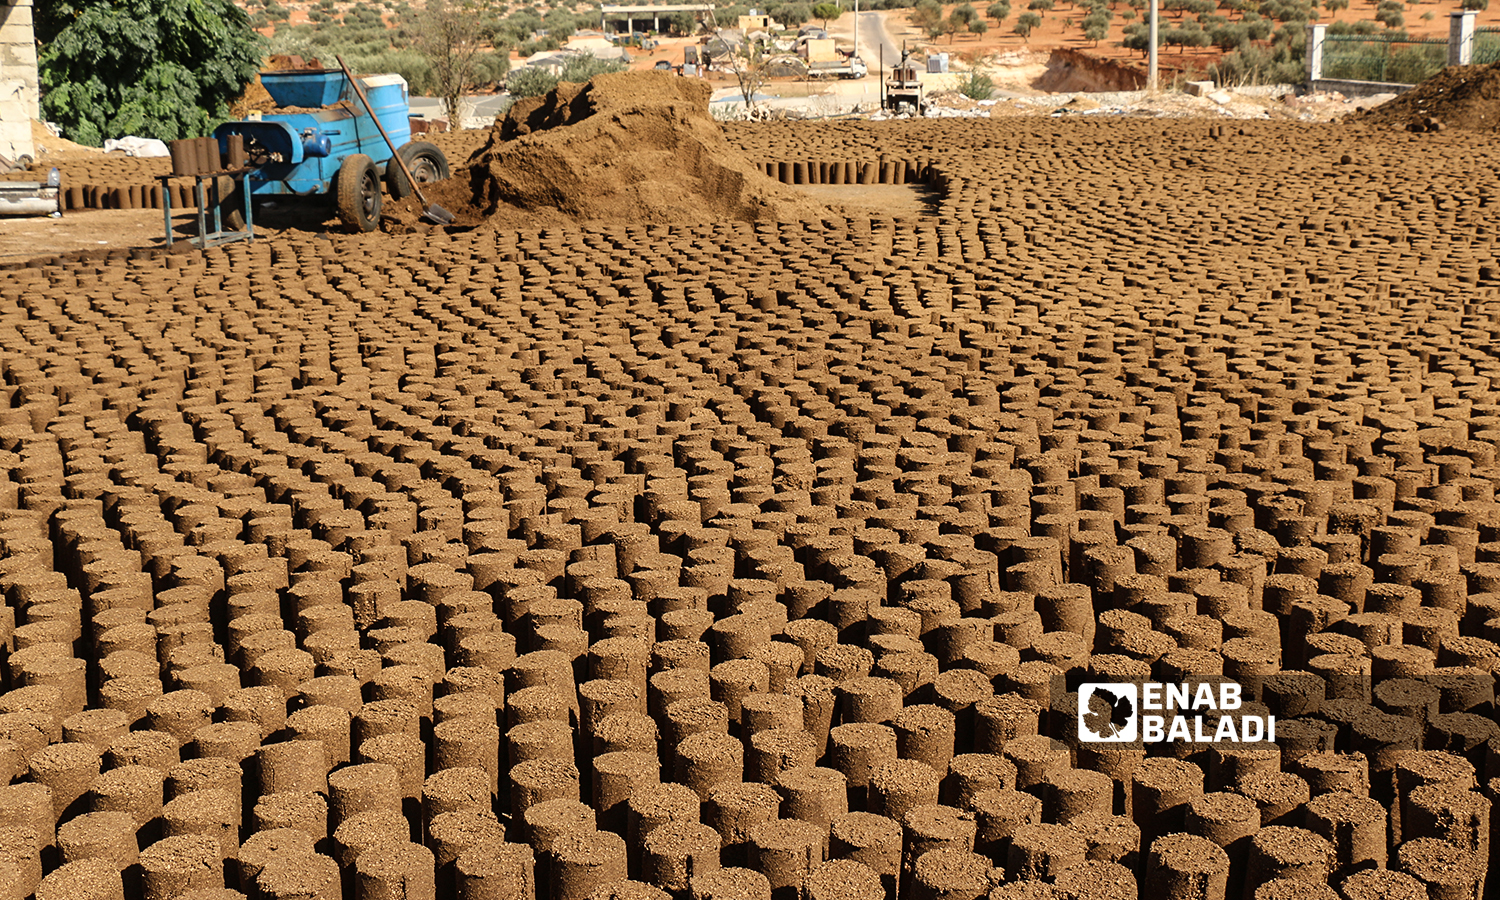 Pomace-wood pellets made from the waste of olive oil and used for heating during winter at Maarat al-Ikhwan in the northern Idlib countryside - 18 October 2021 (Enab Baladi/Iyad Abdul Jawad)
